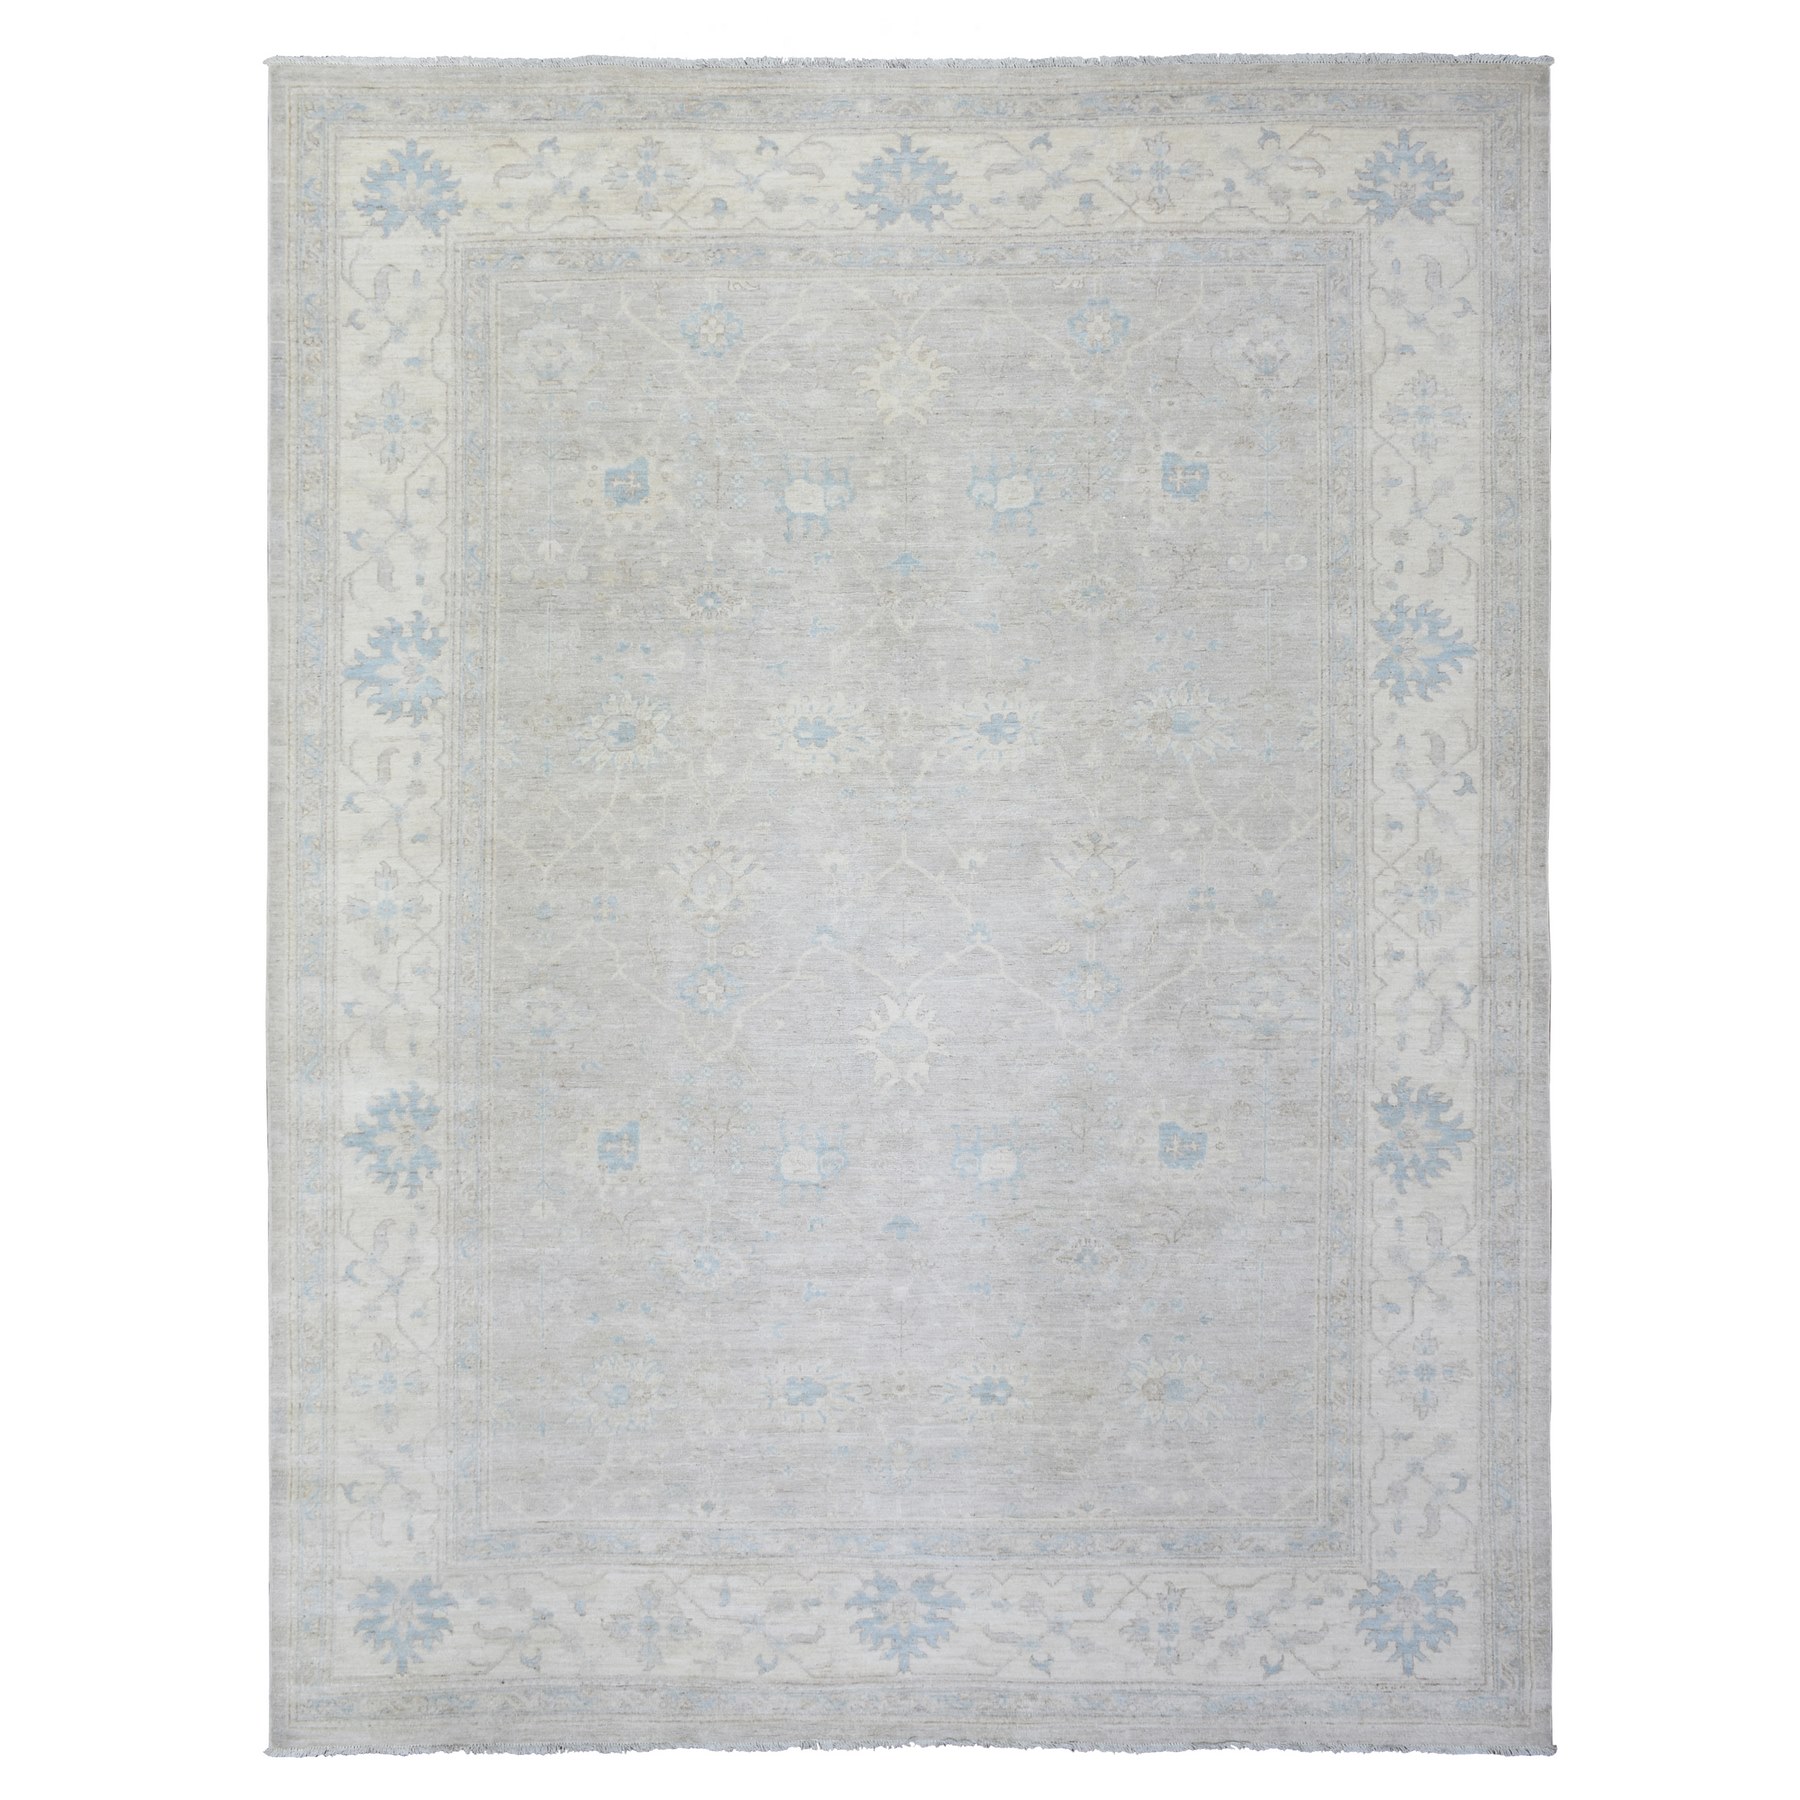 9'x11'6" Light Taupe, Hand Woven White Wash Peshawar with All Over Floral Motifs, Natural Dyes Soft Wool, Oriental Rug 